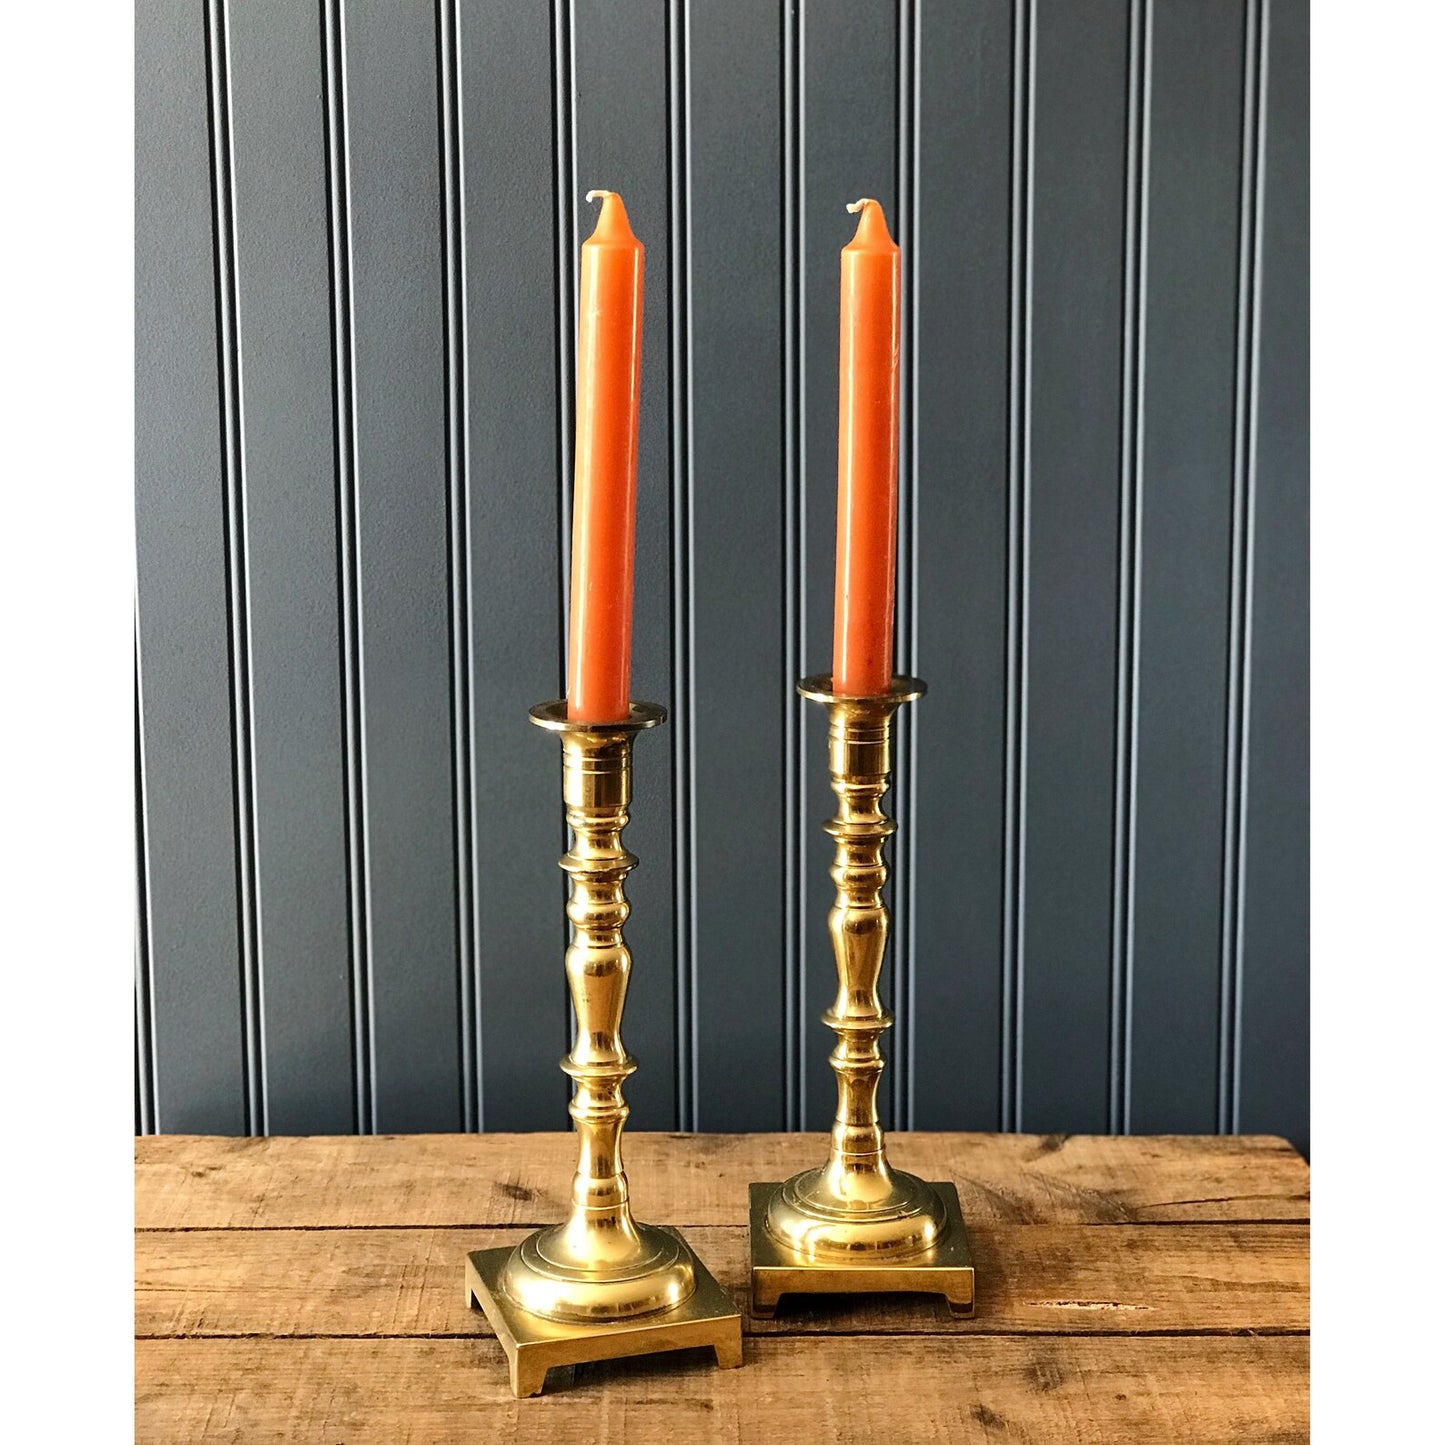 Pair of Tall Brass Taper Candle Holders